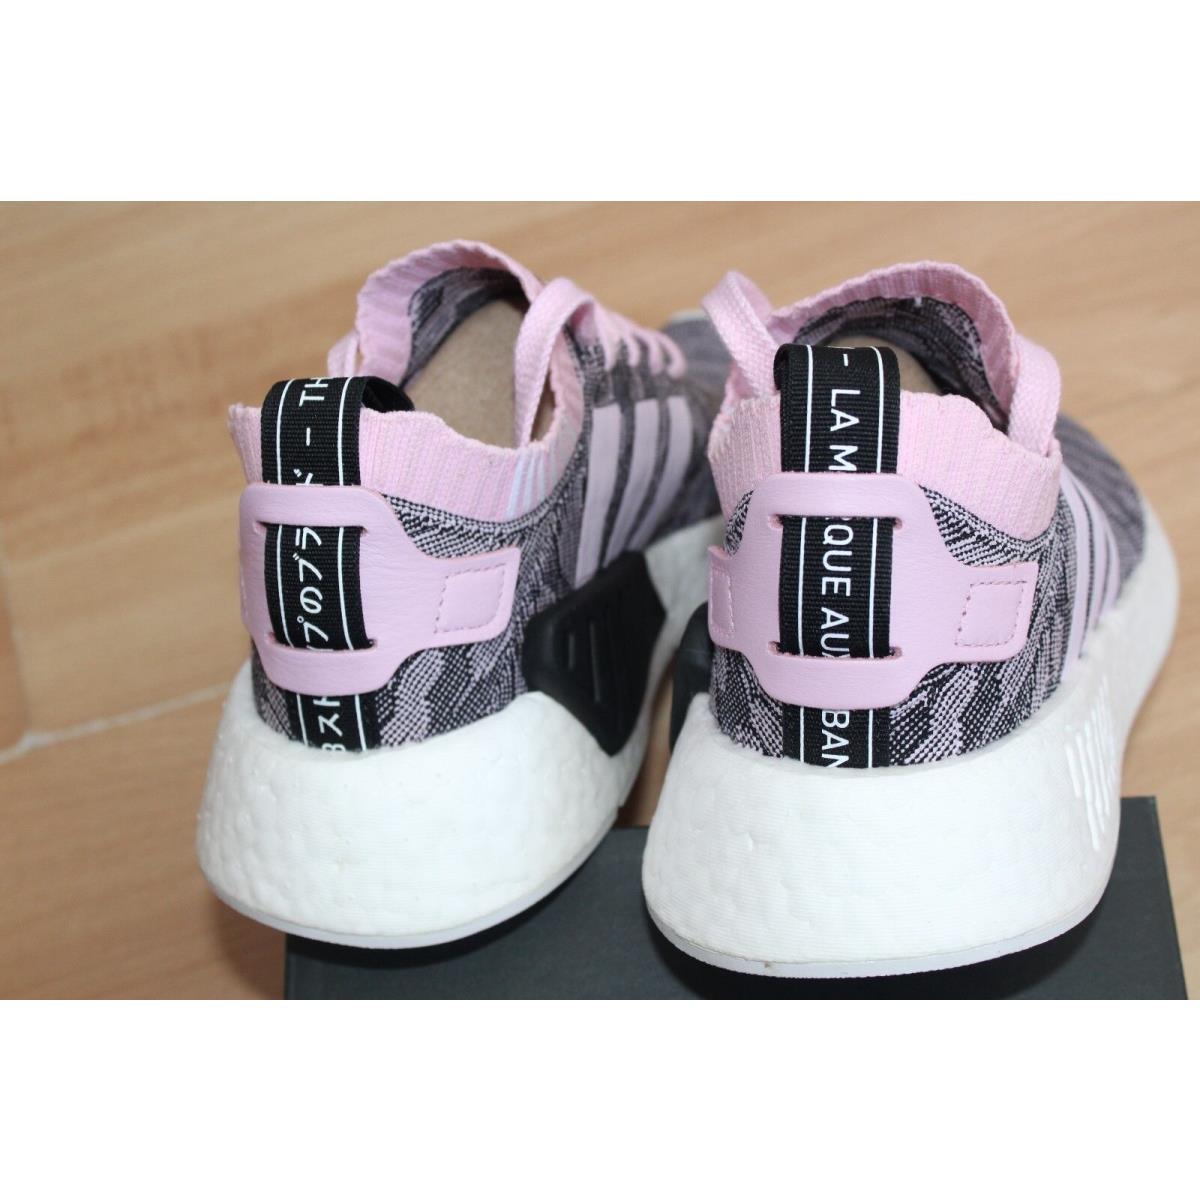 Adidas shoes NMD - PINK 6